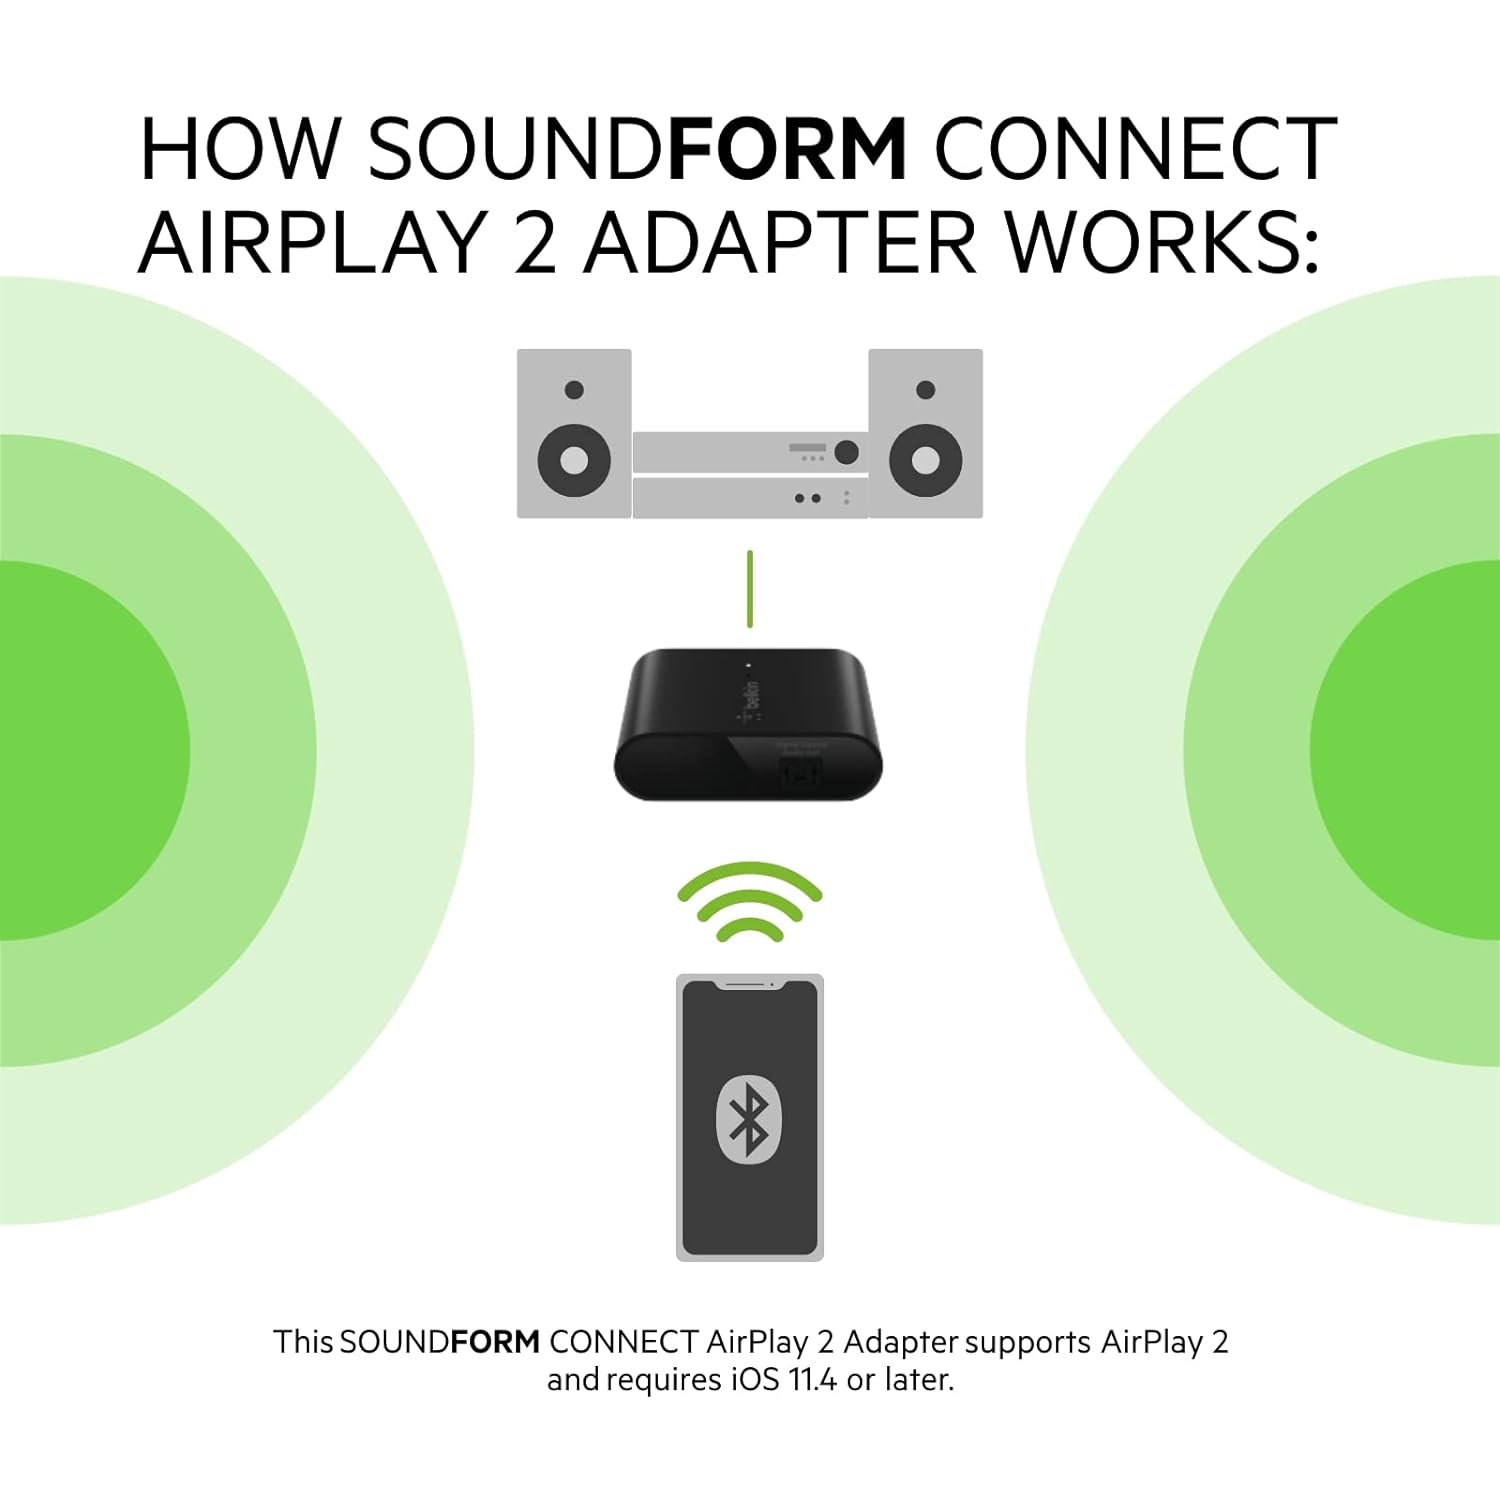 Belkin SoundForm Connect AirPlay 2 Audio Adapter Receiver for Wireless Streaming with Optical and 3.5mm Speaker Inputs for iPhone, iPad, Mac Mini, MacBook Pro and Other AirPlay Enabled Devices